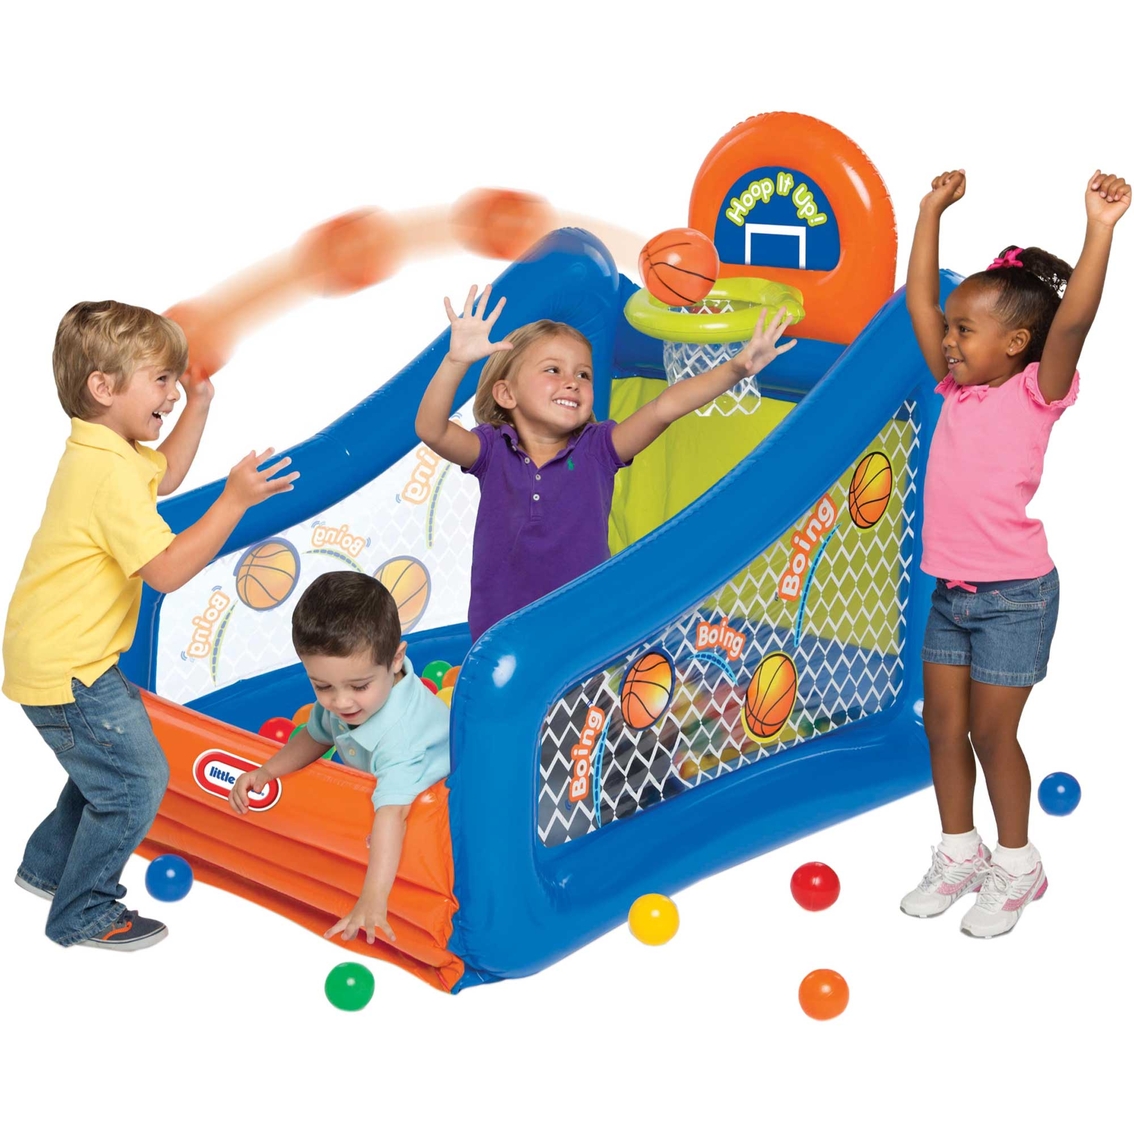 Little Tikes Hoop It Up! Play Center Ball Pit - Image 2 of 3